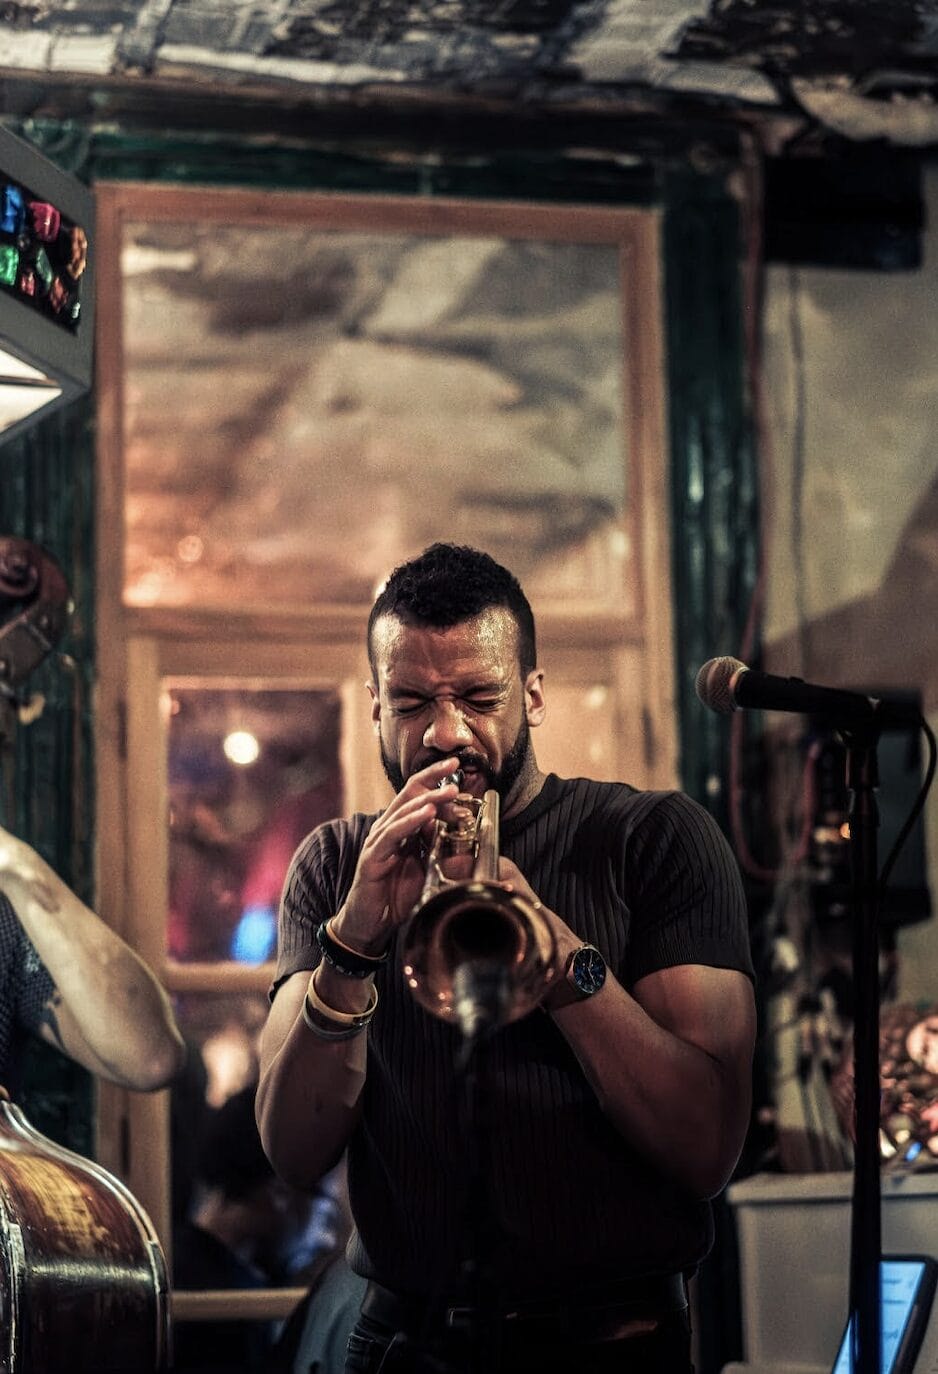 The ‘Late Show’ Horn Player and O.A.R. Touring Member Jon Lampley Outlines Debut LP